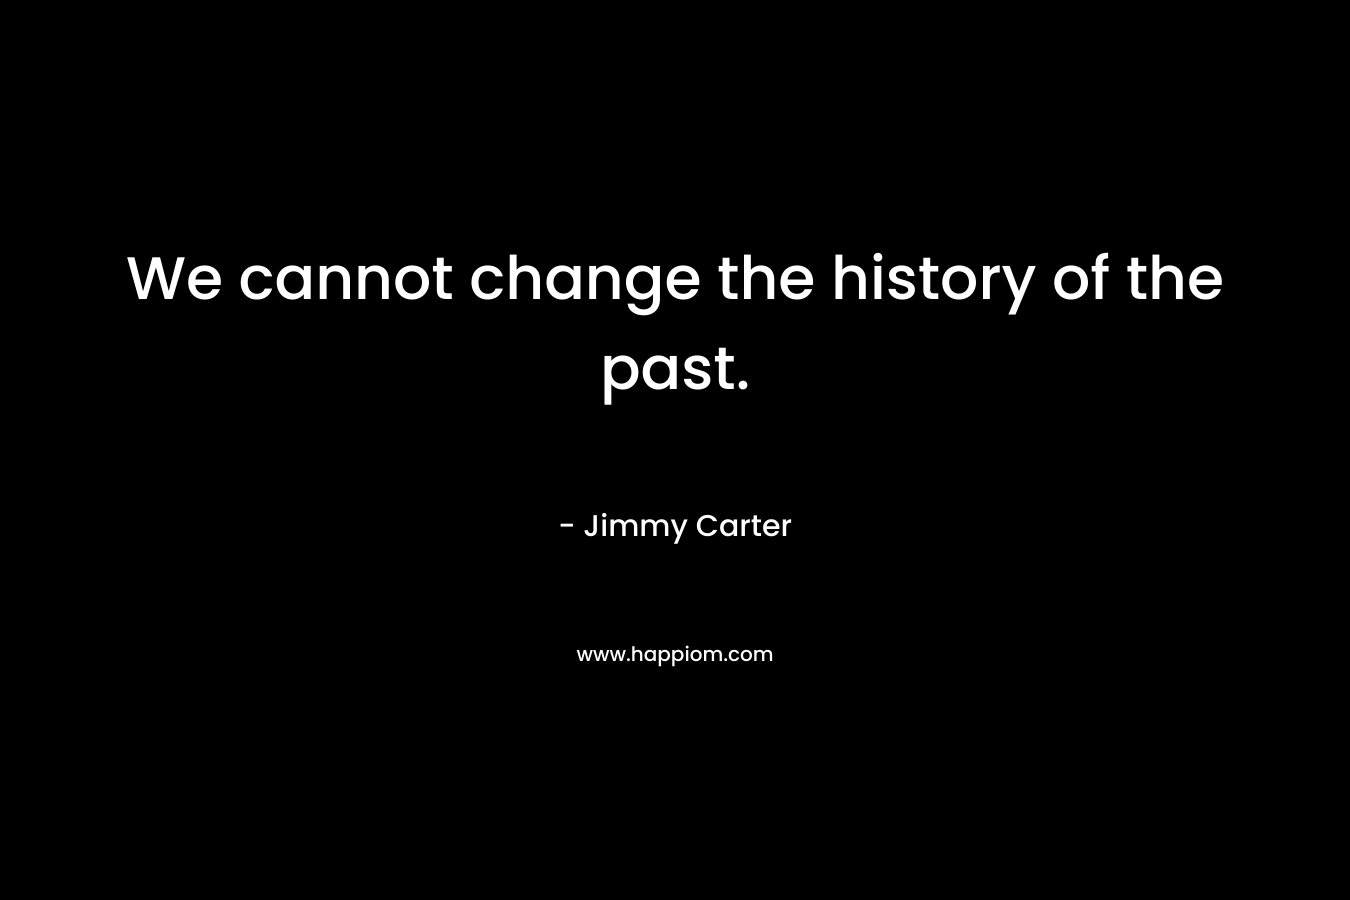 We cannot change the history of the past. – Jimmy Carter